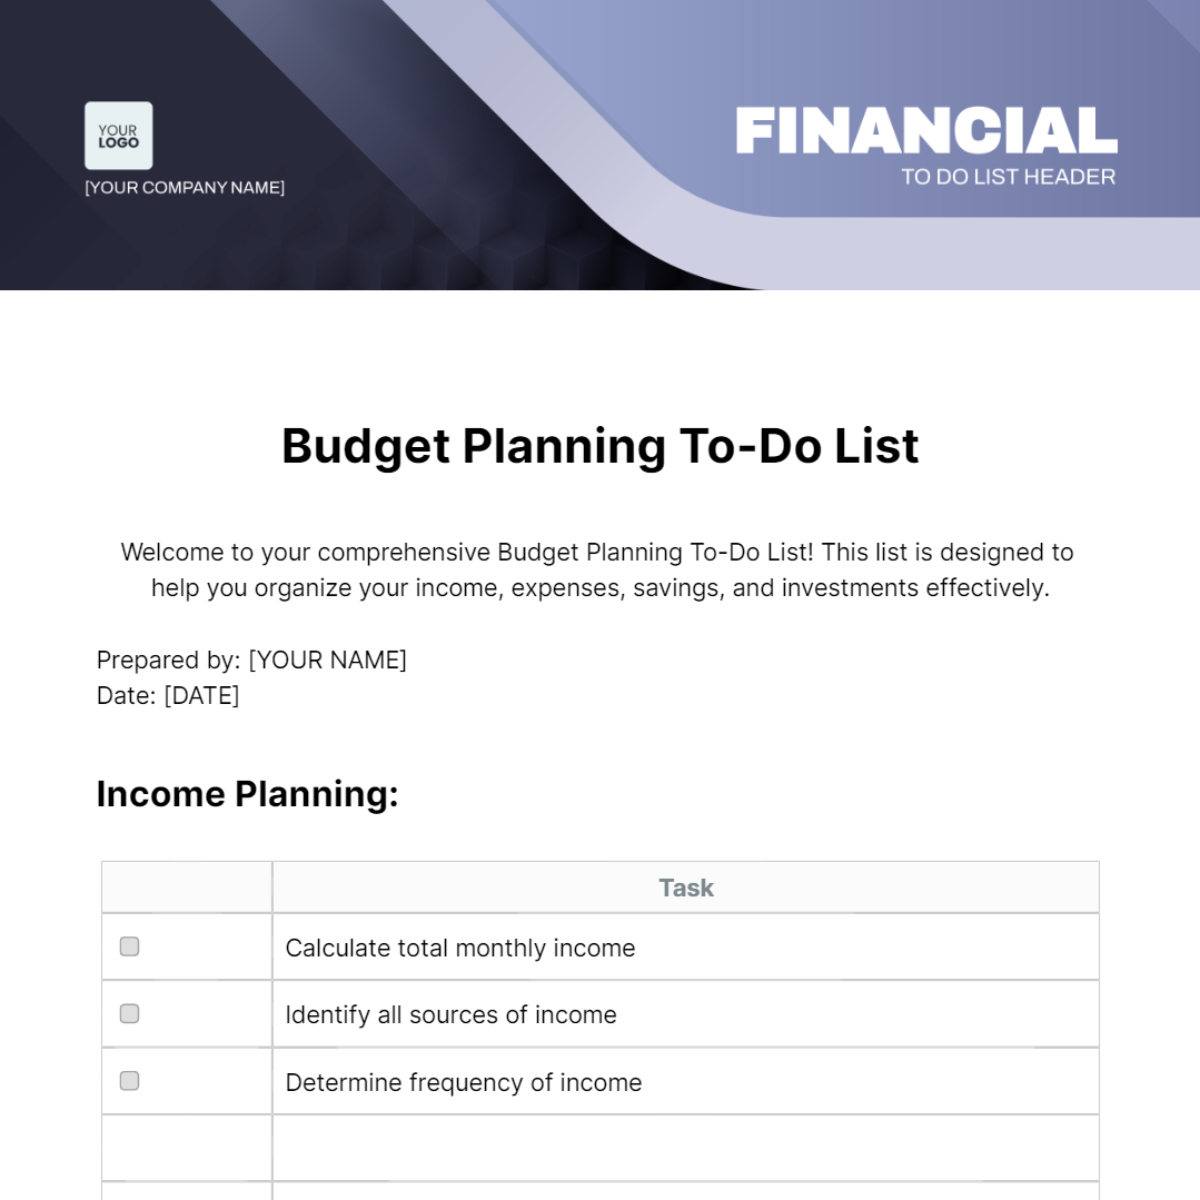 Budget Planning To Do List Template